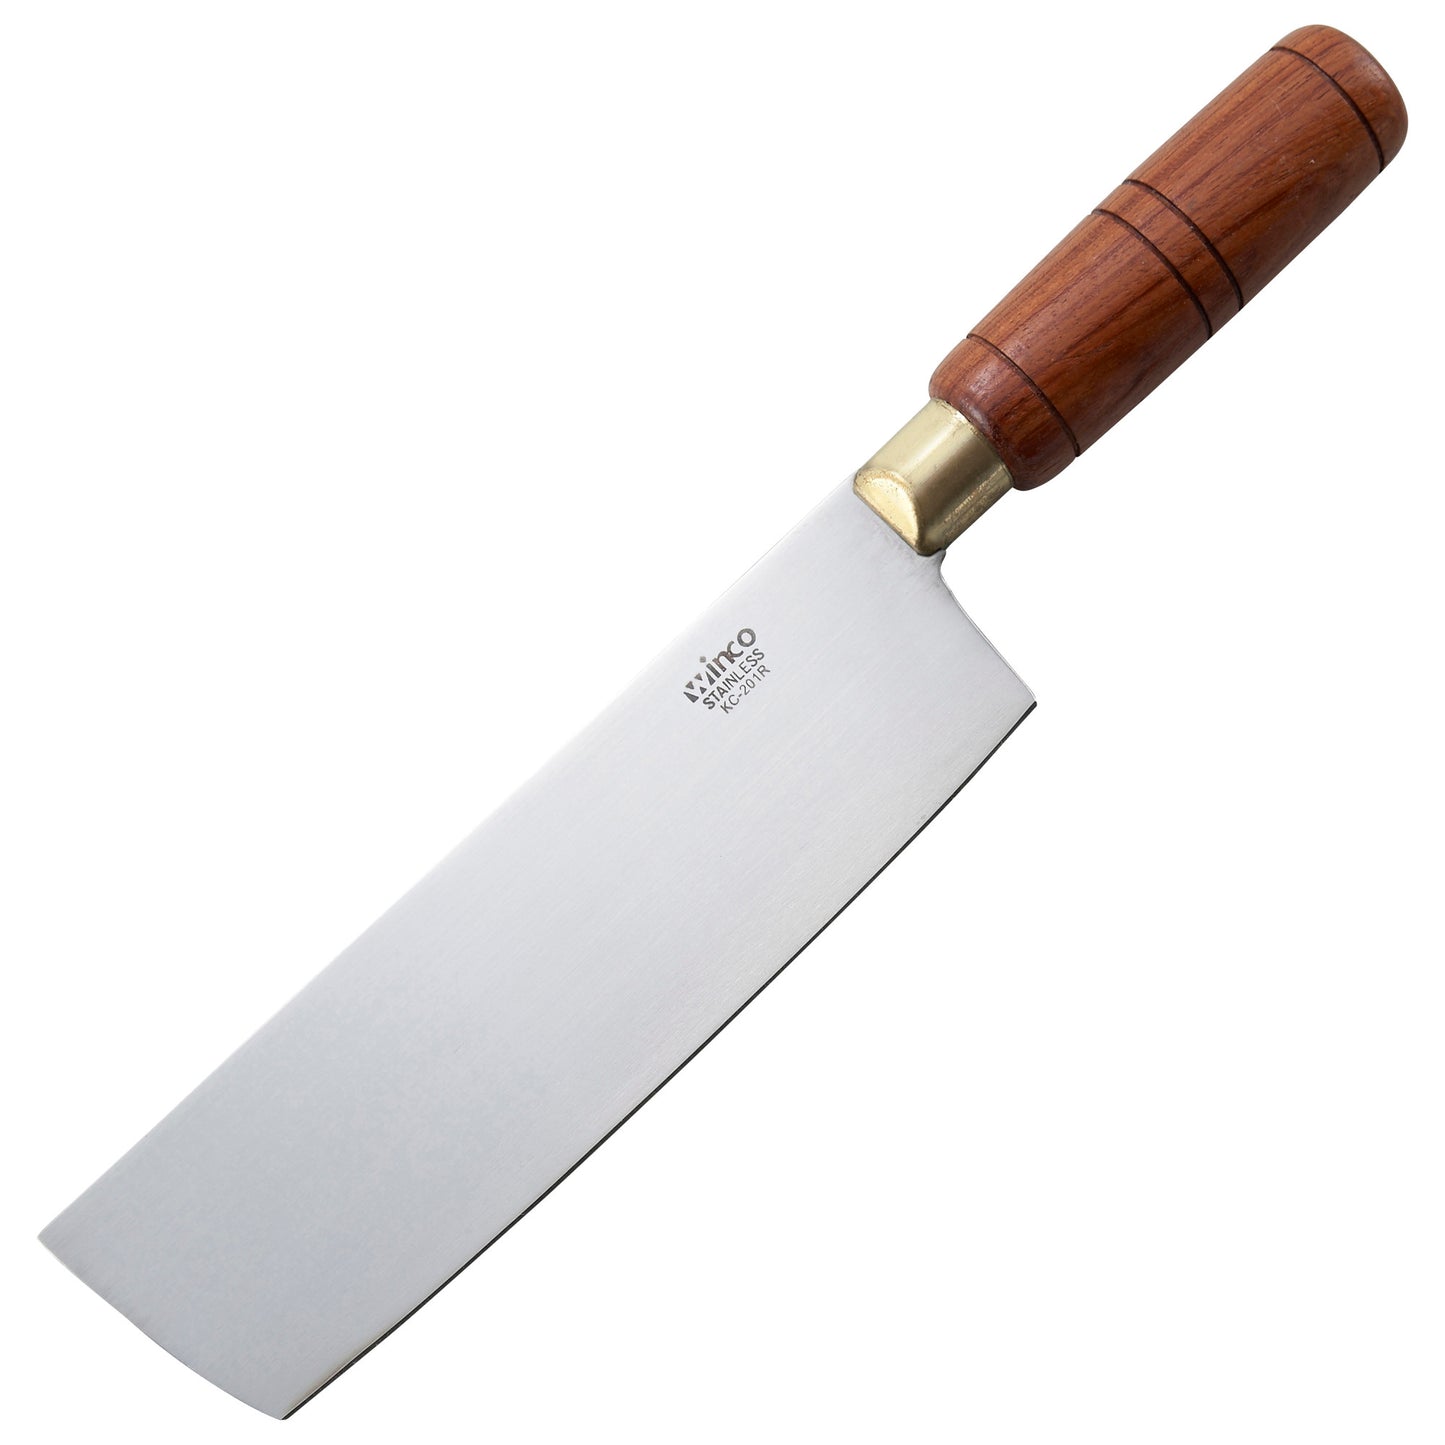 KC-201R - Chinese Cleaver with Wooden Handle, 7" x 2" Blade